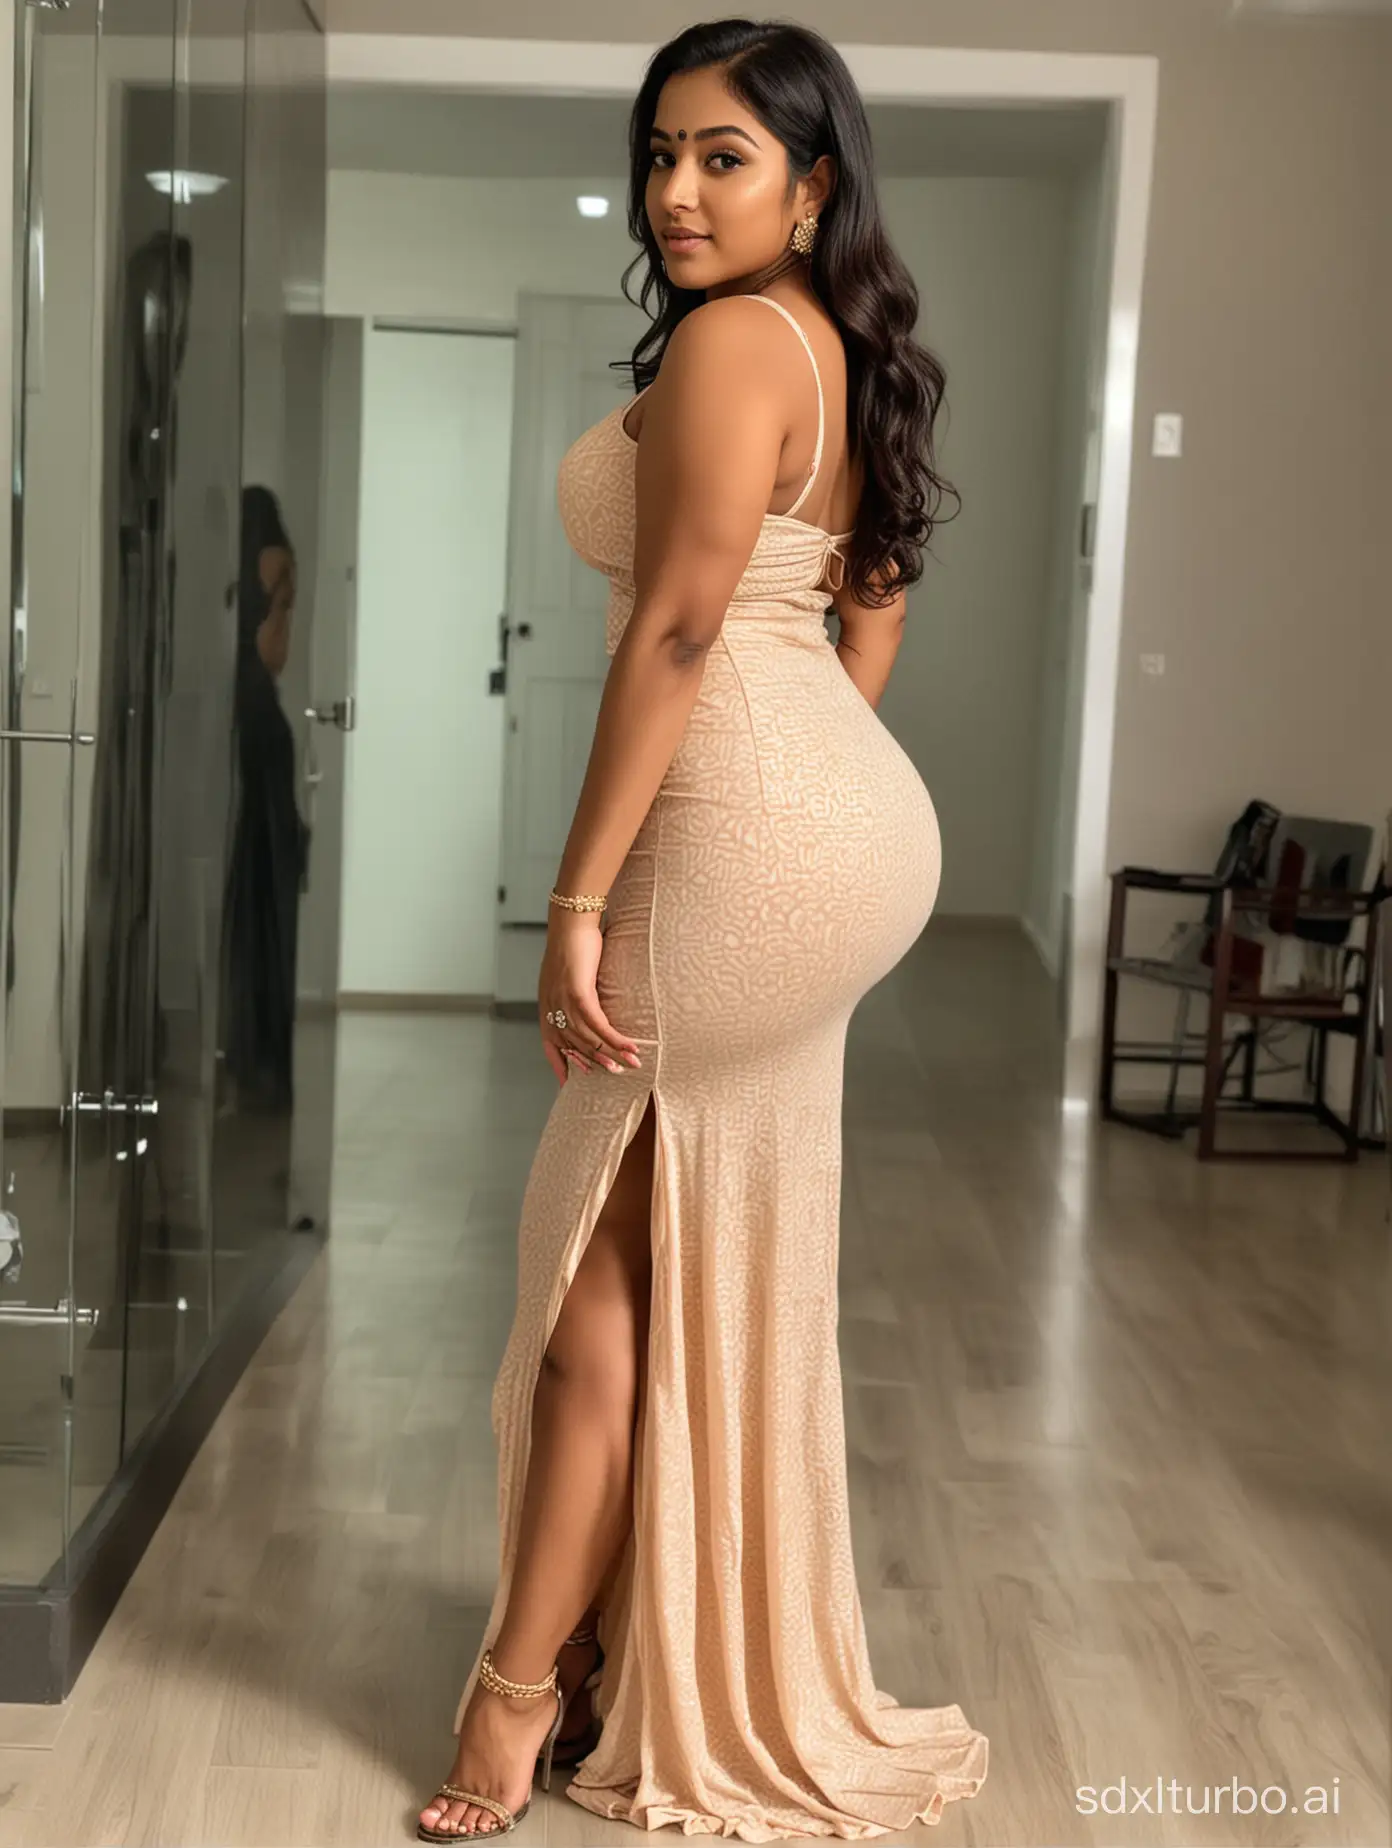 Indian booty curvy girl in high split dress thunder thighs hourglass body.